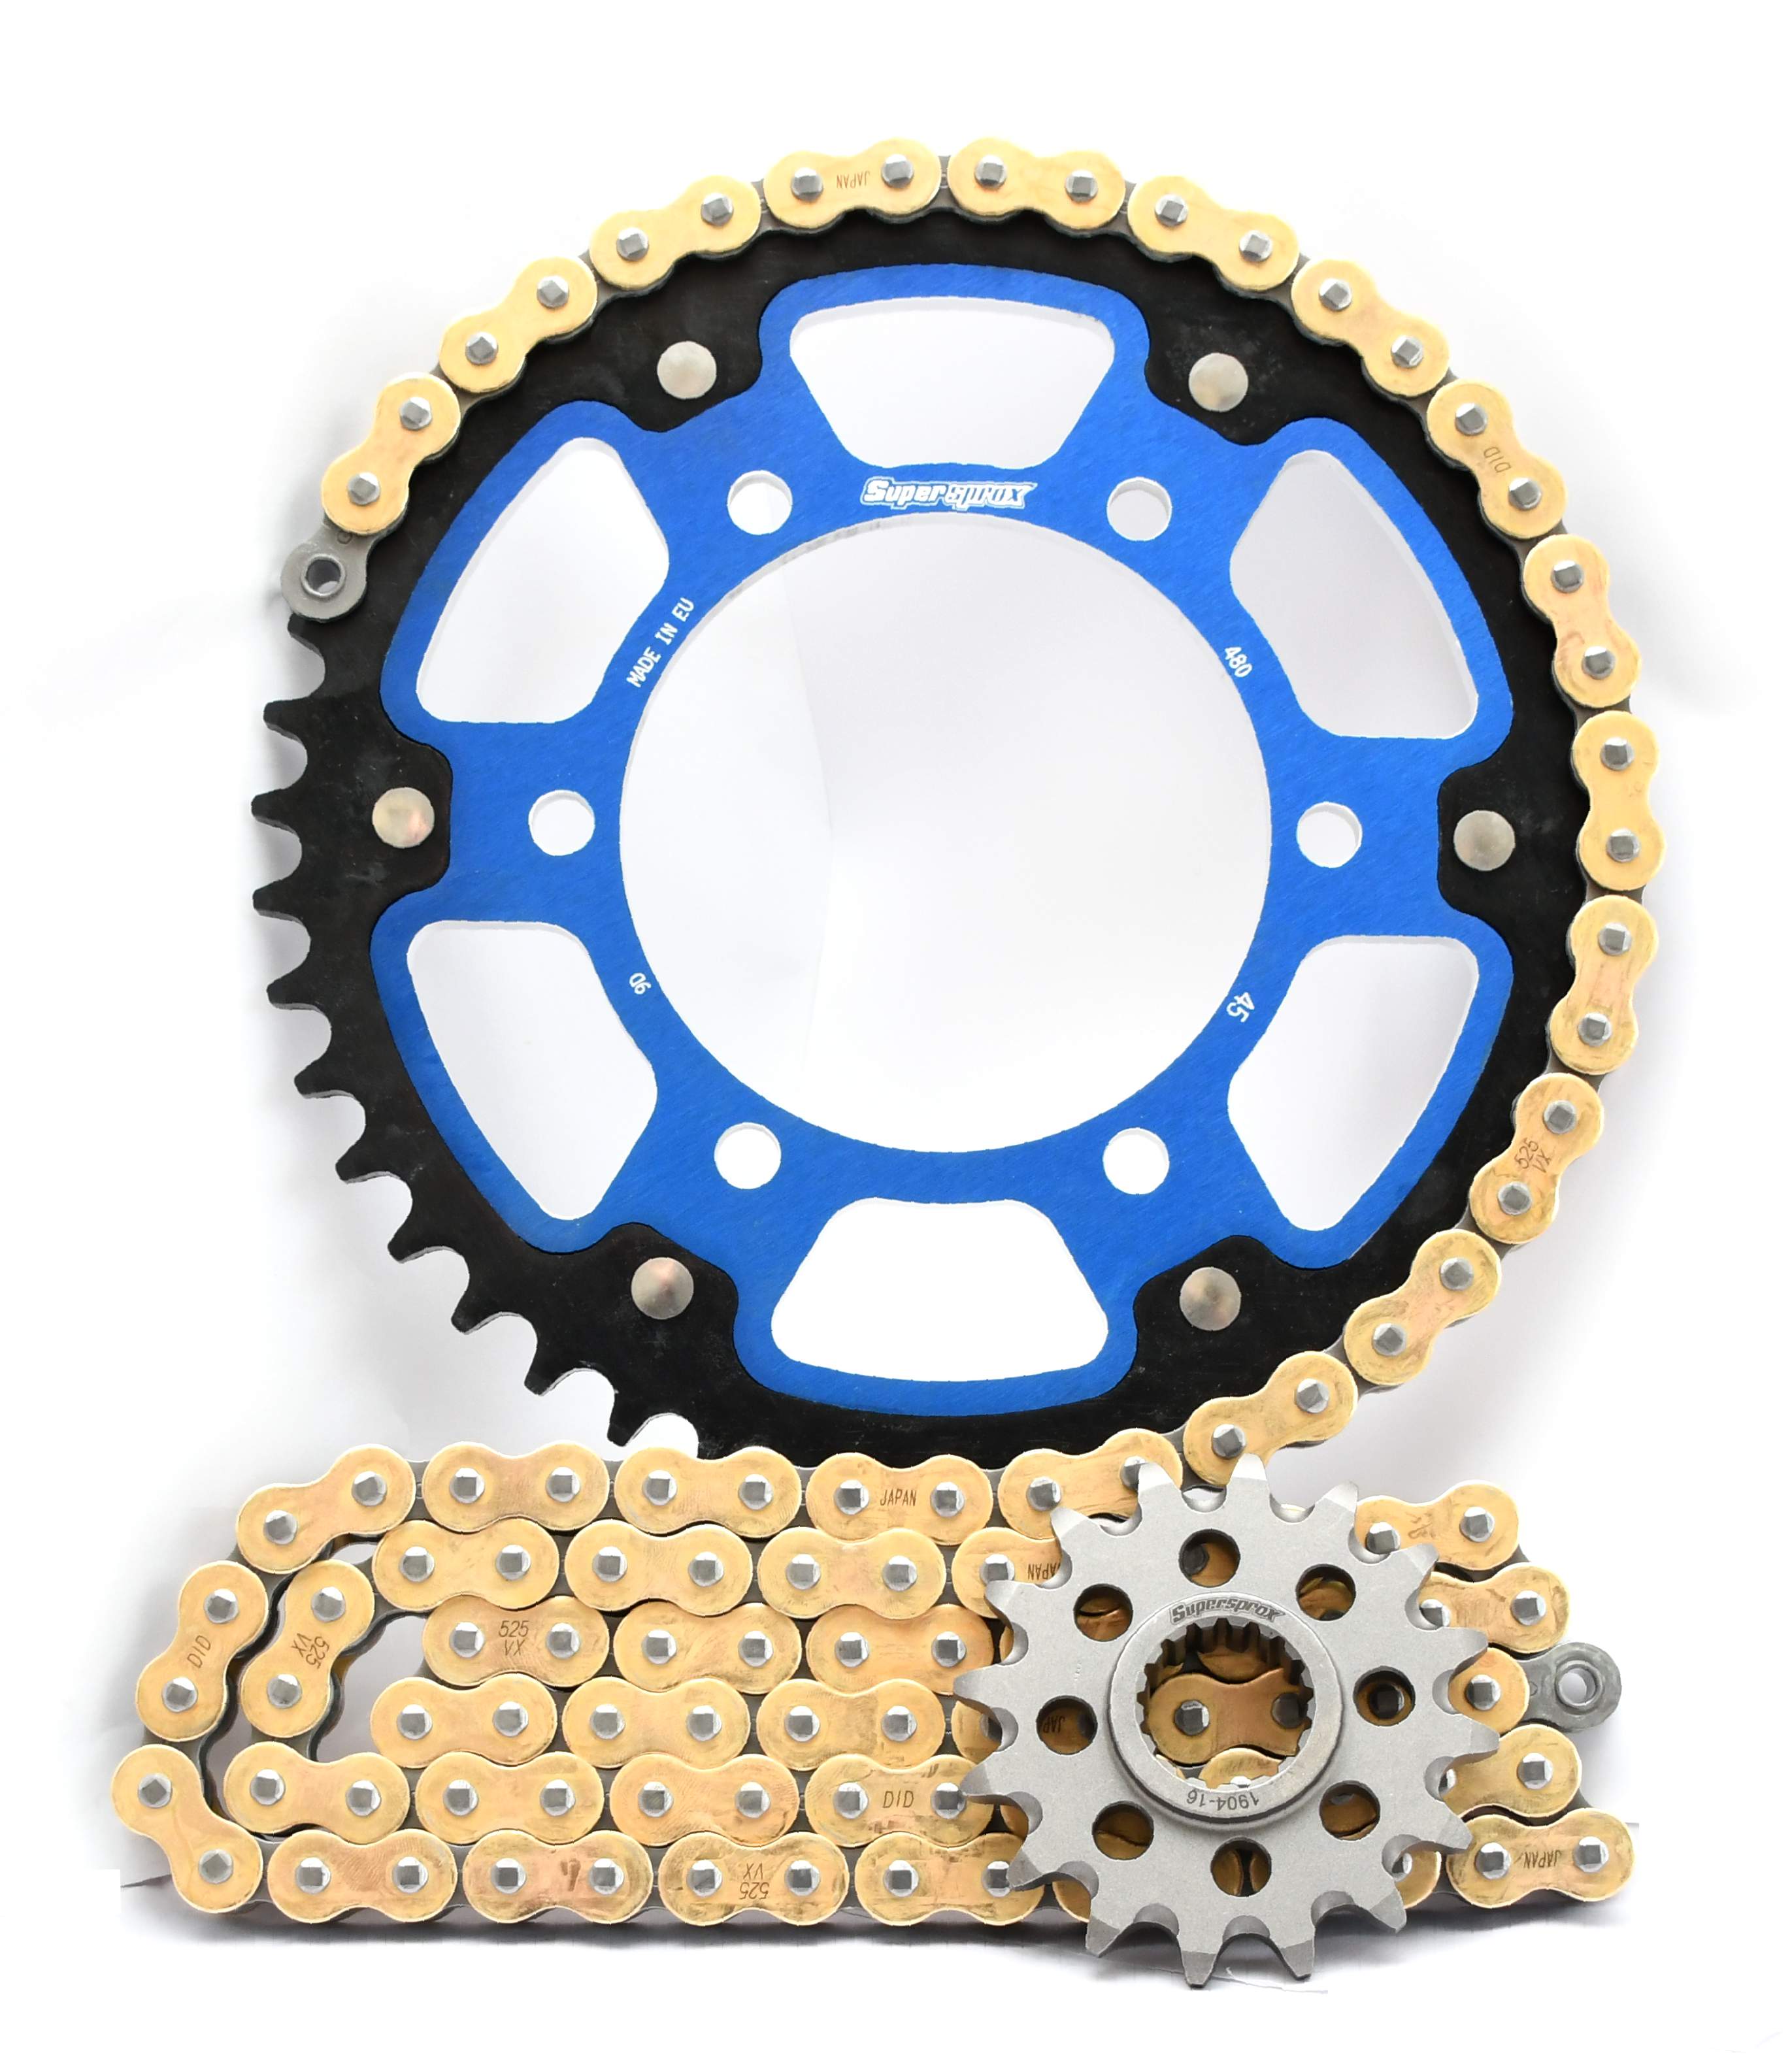 Supersprox Chain & Sprocket Kit for GSX-R 600/750 L1-L8 - Choose Your Gearing - 0